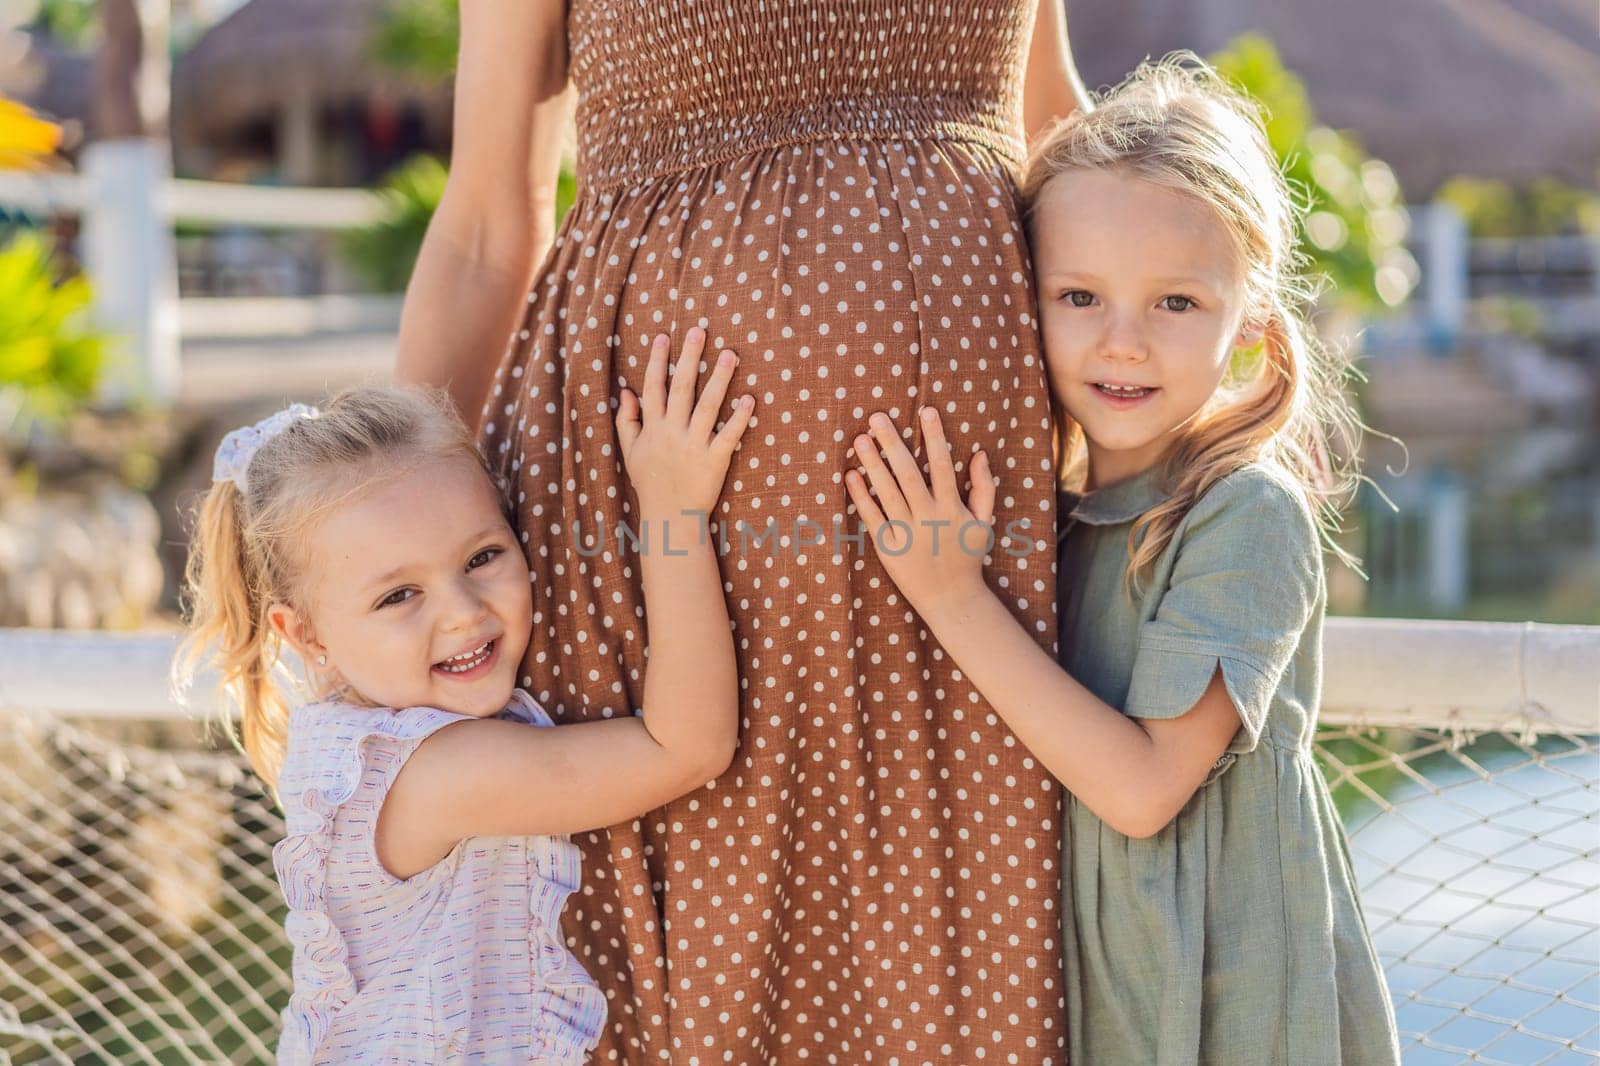 Sisters' love blooms as they tenderly embrace their mother's pregnant belly, sharing anticipation and affection for their soon-to-arrive sibling.